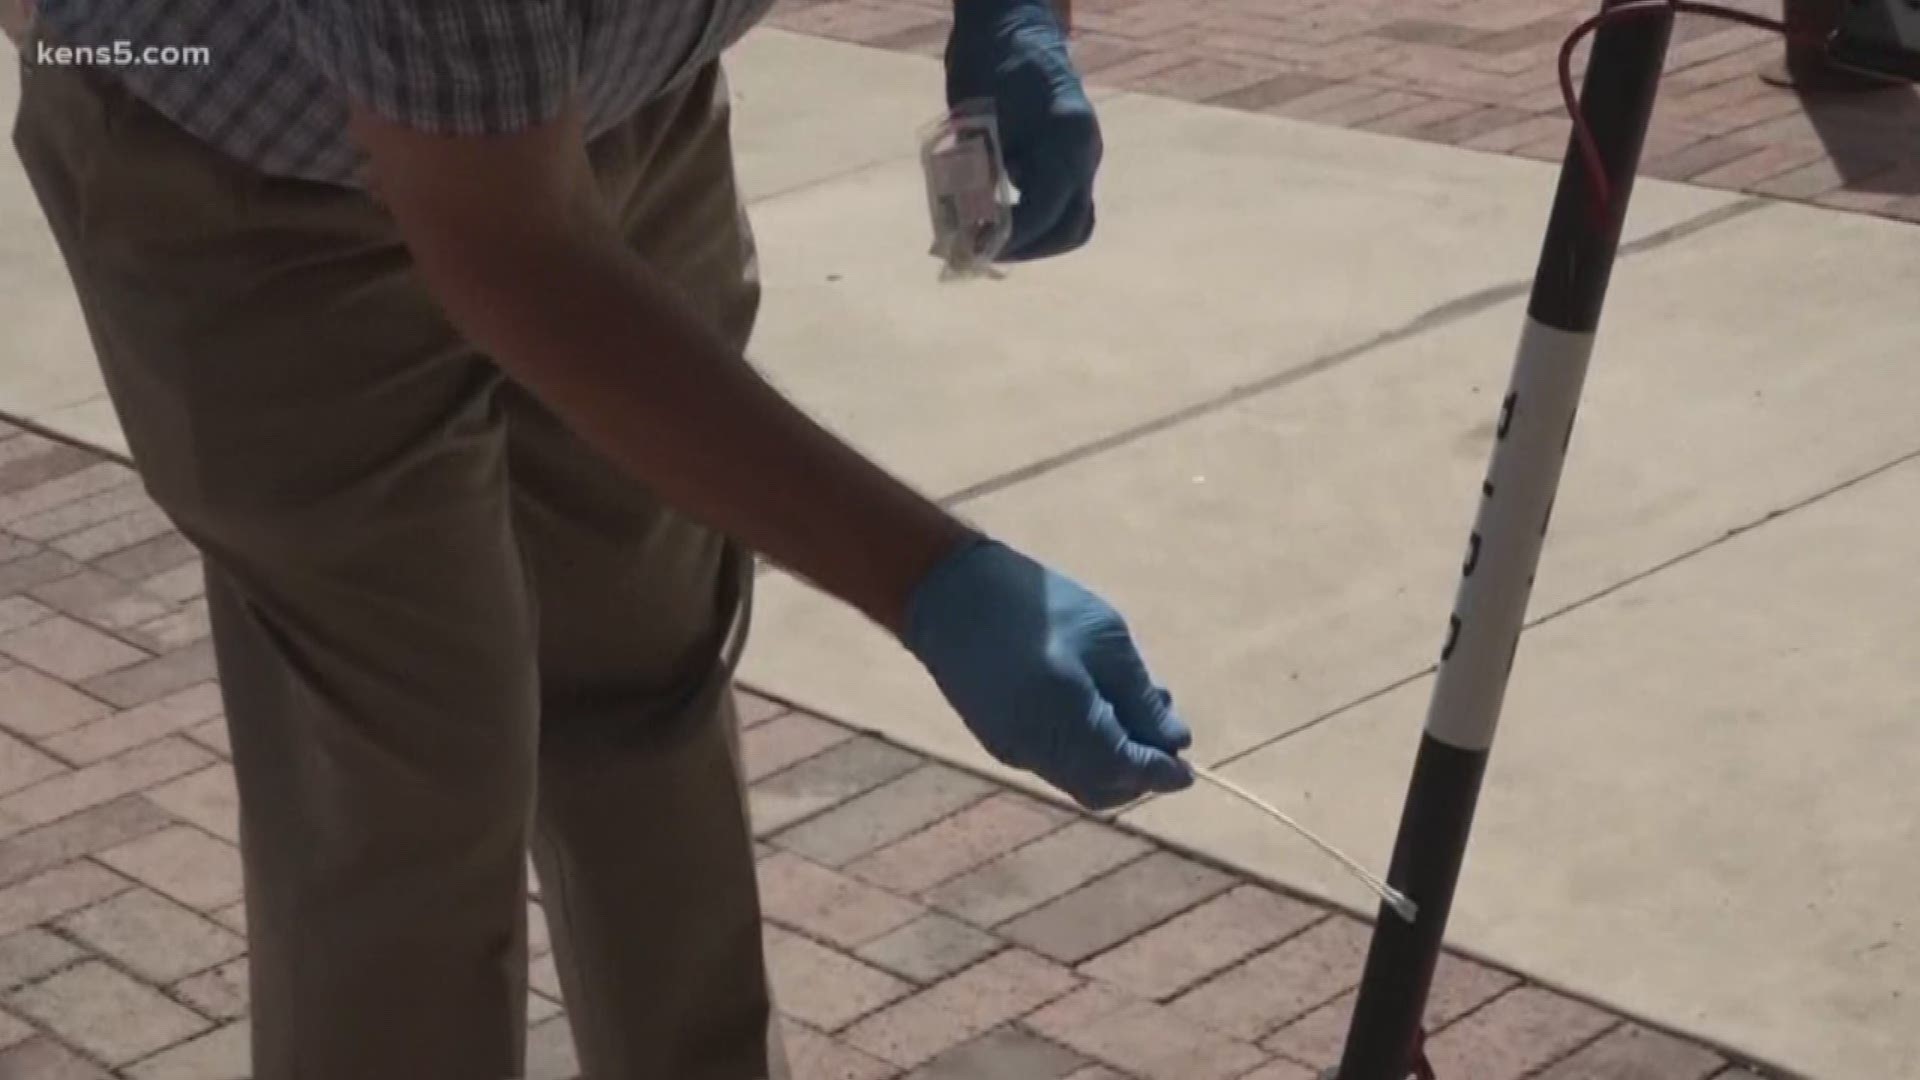 We had a local lab test different methods of San Antonio transportation to see how contaminated they were, and compared those results to what the public thought the dirtiest surfaces would be.